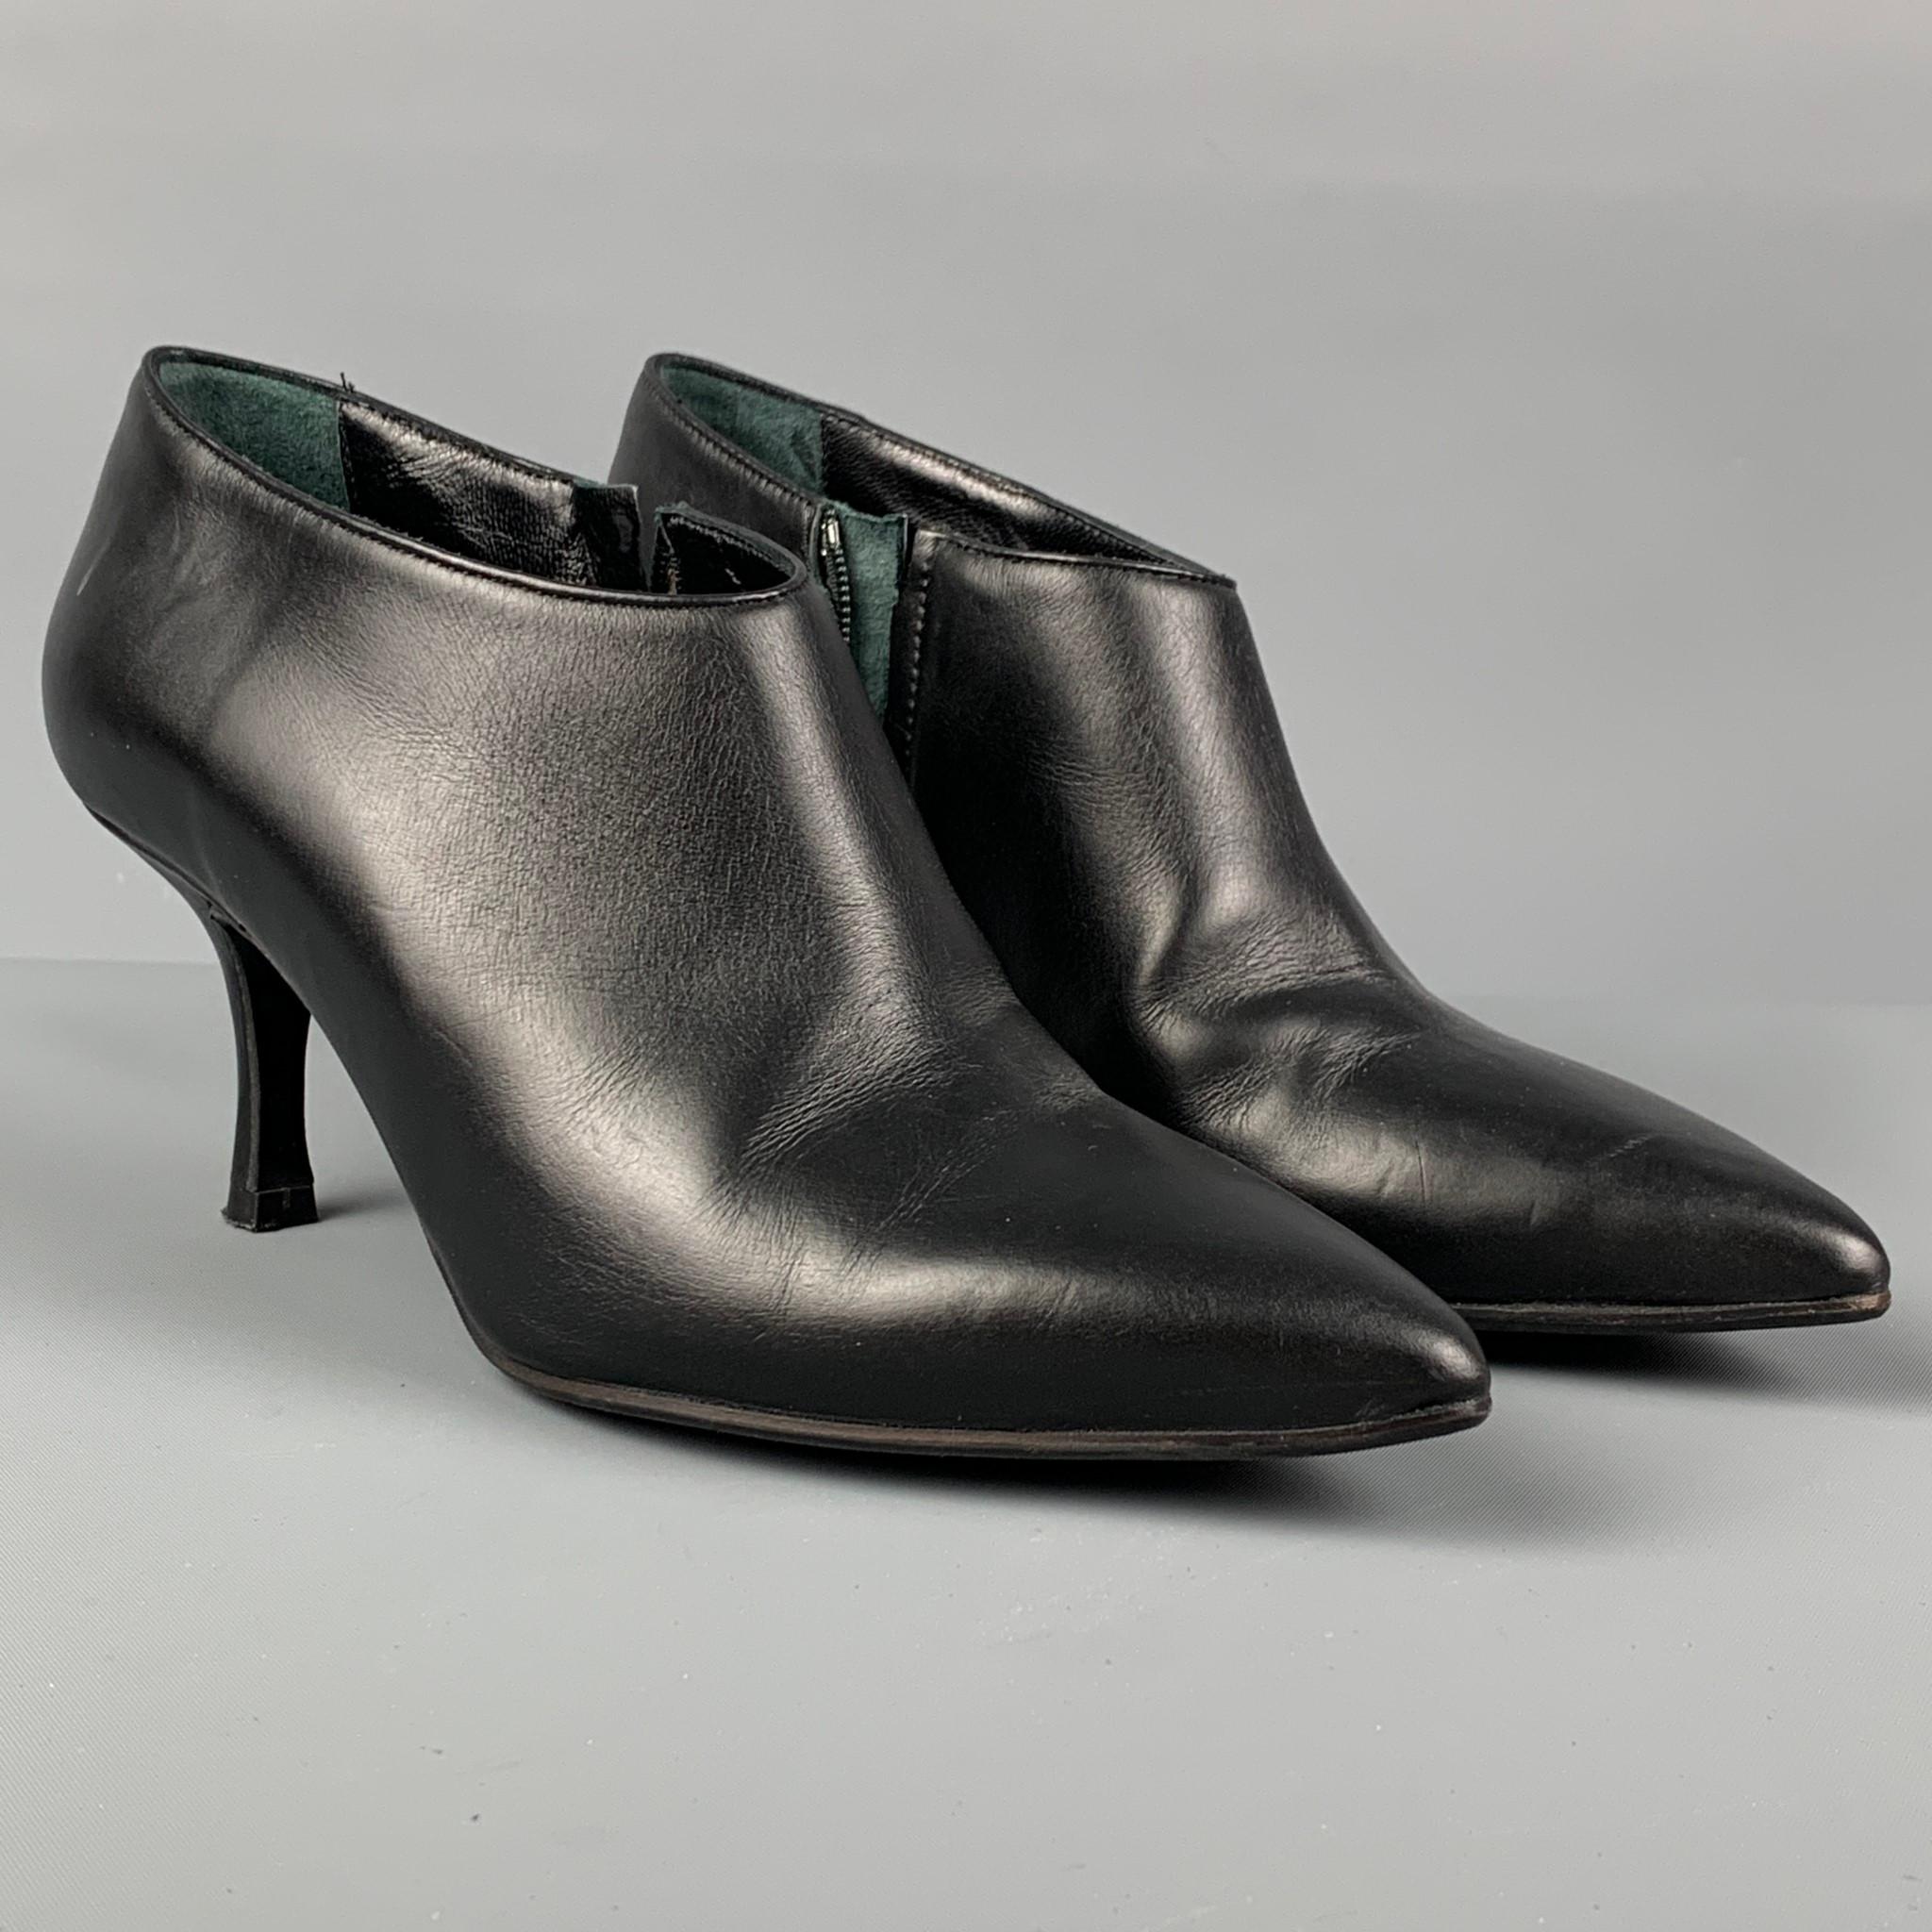 L.K.BENNETT booties comes in a black leather featuring a pointed toe, kitten heel, and a side zipper closure. Made in Italy. 

Very Good Pre-Owned Condition.
Marked: 36
Original Retail Price: $465.00

Measurements:

Heel: 3 in. 